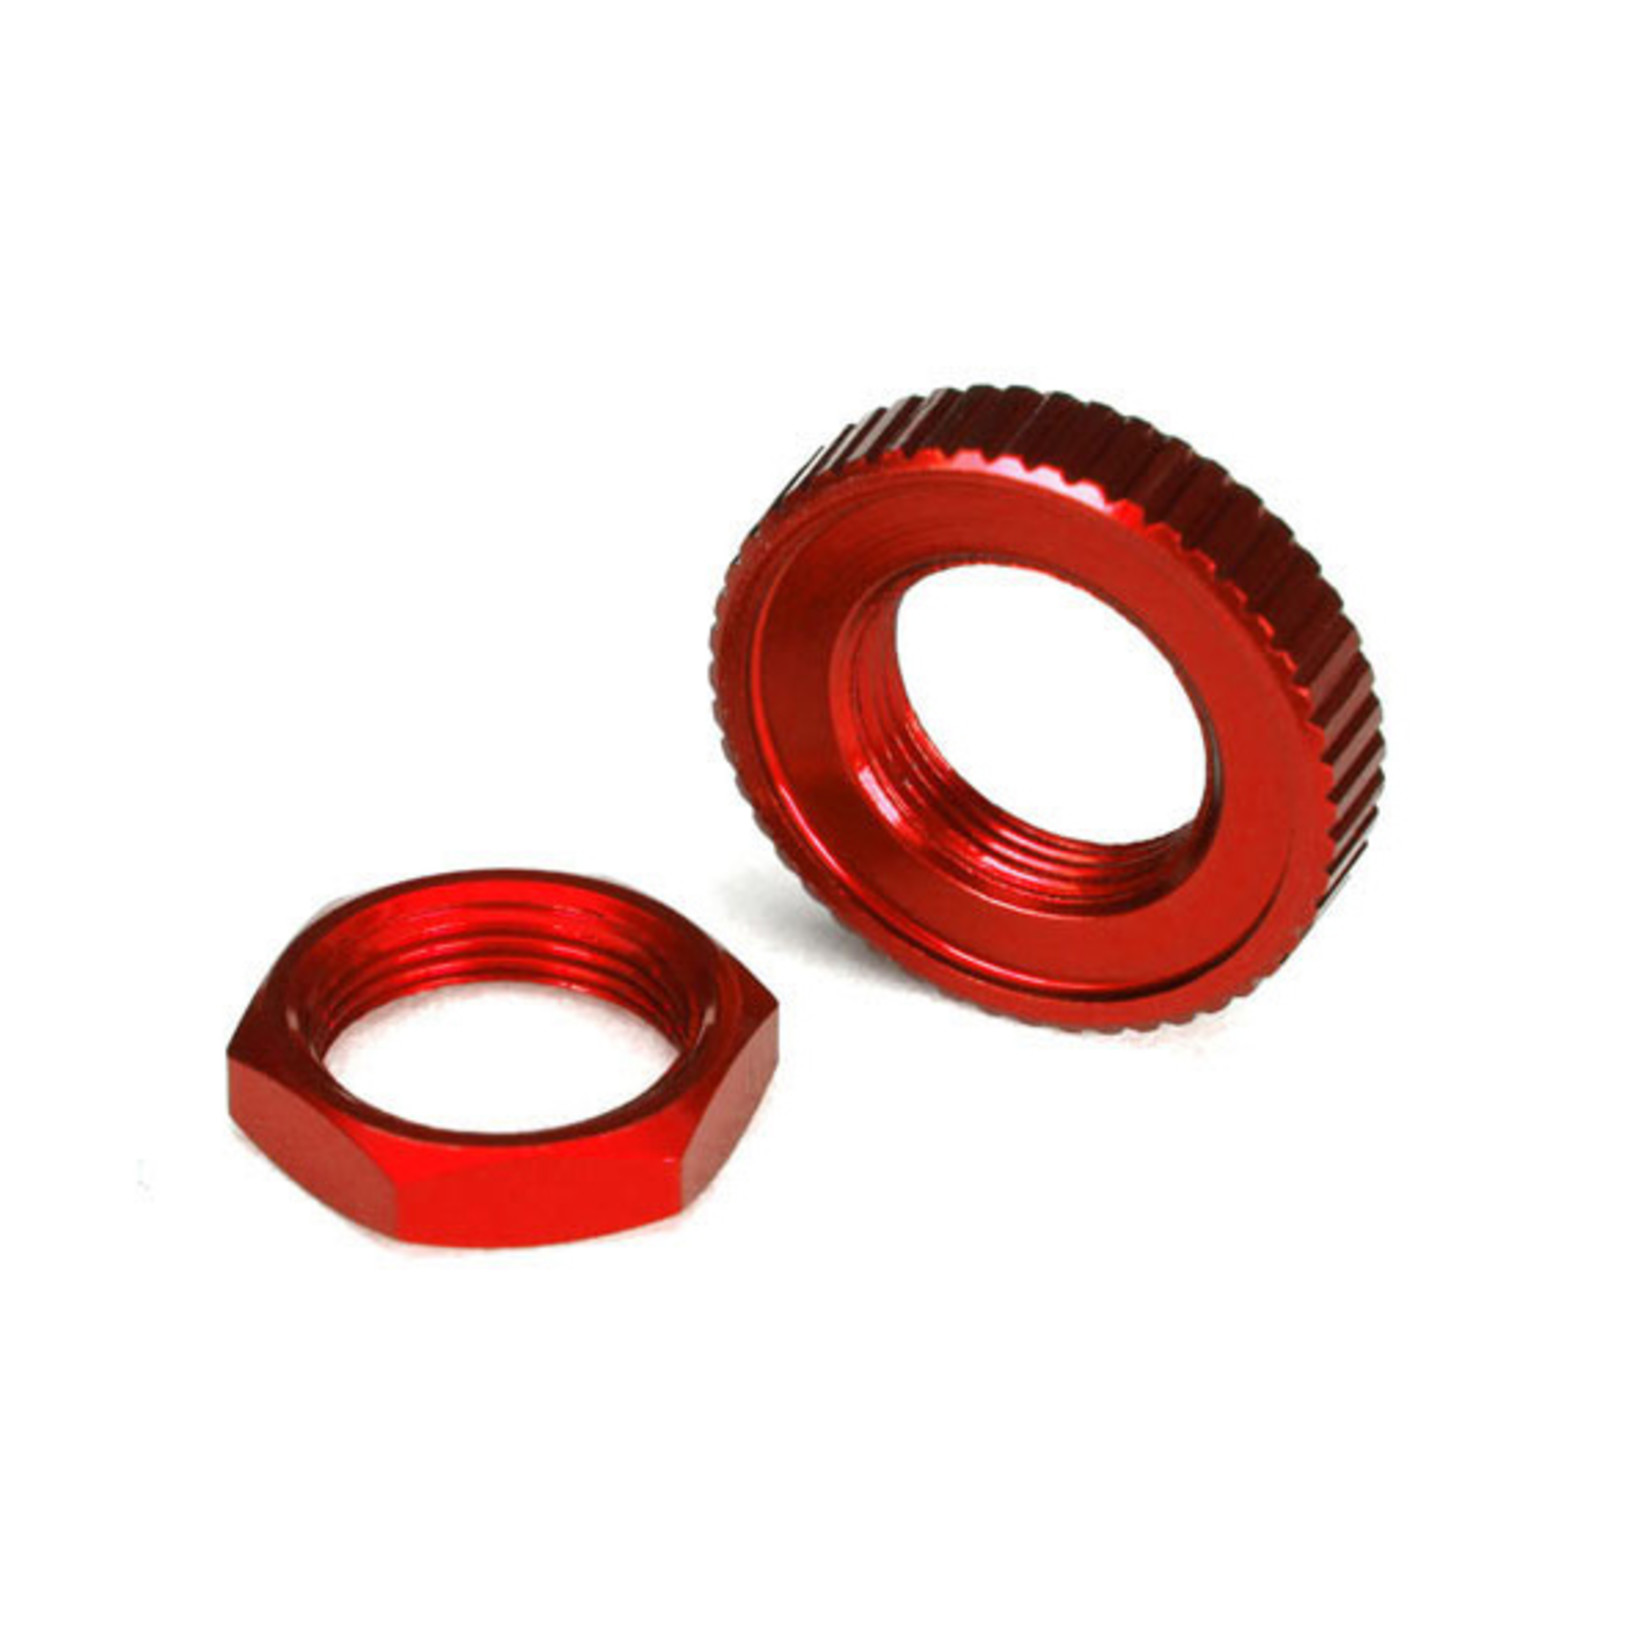 Traxxas 8345R - Servo saver nuts, aluminum, red-anodized (